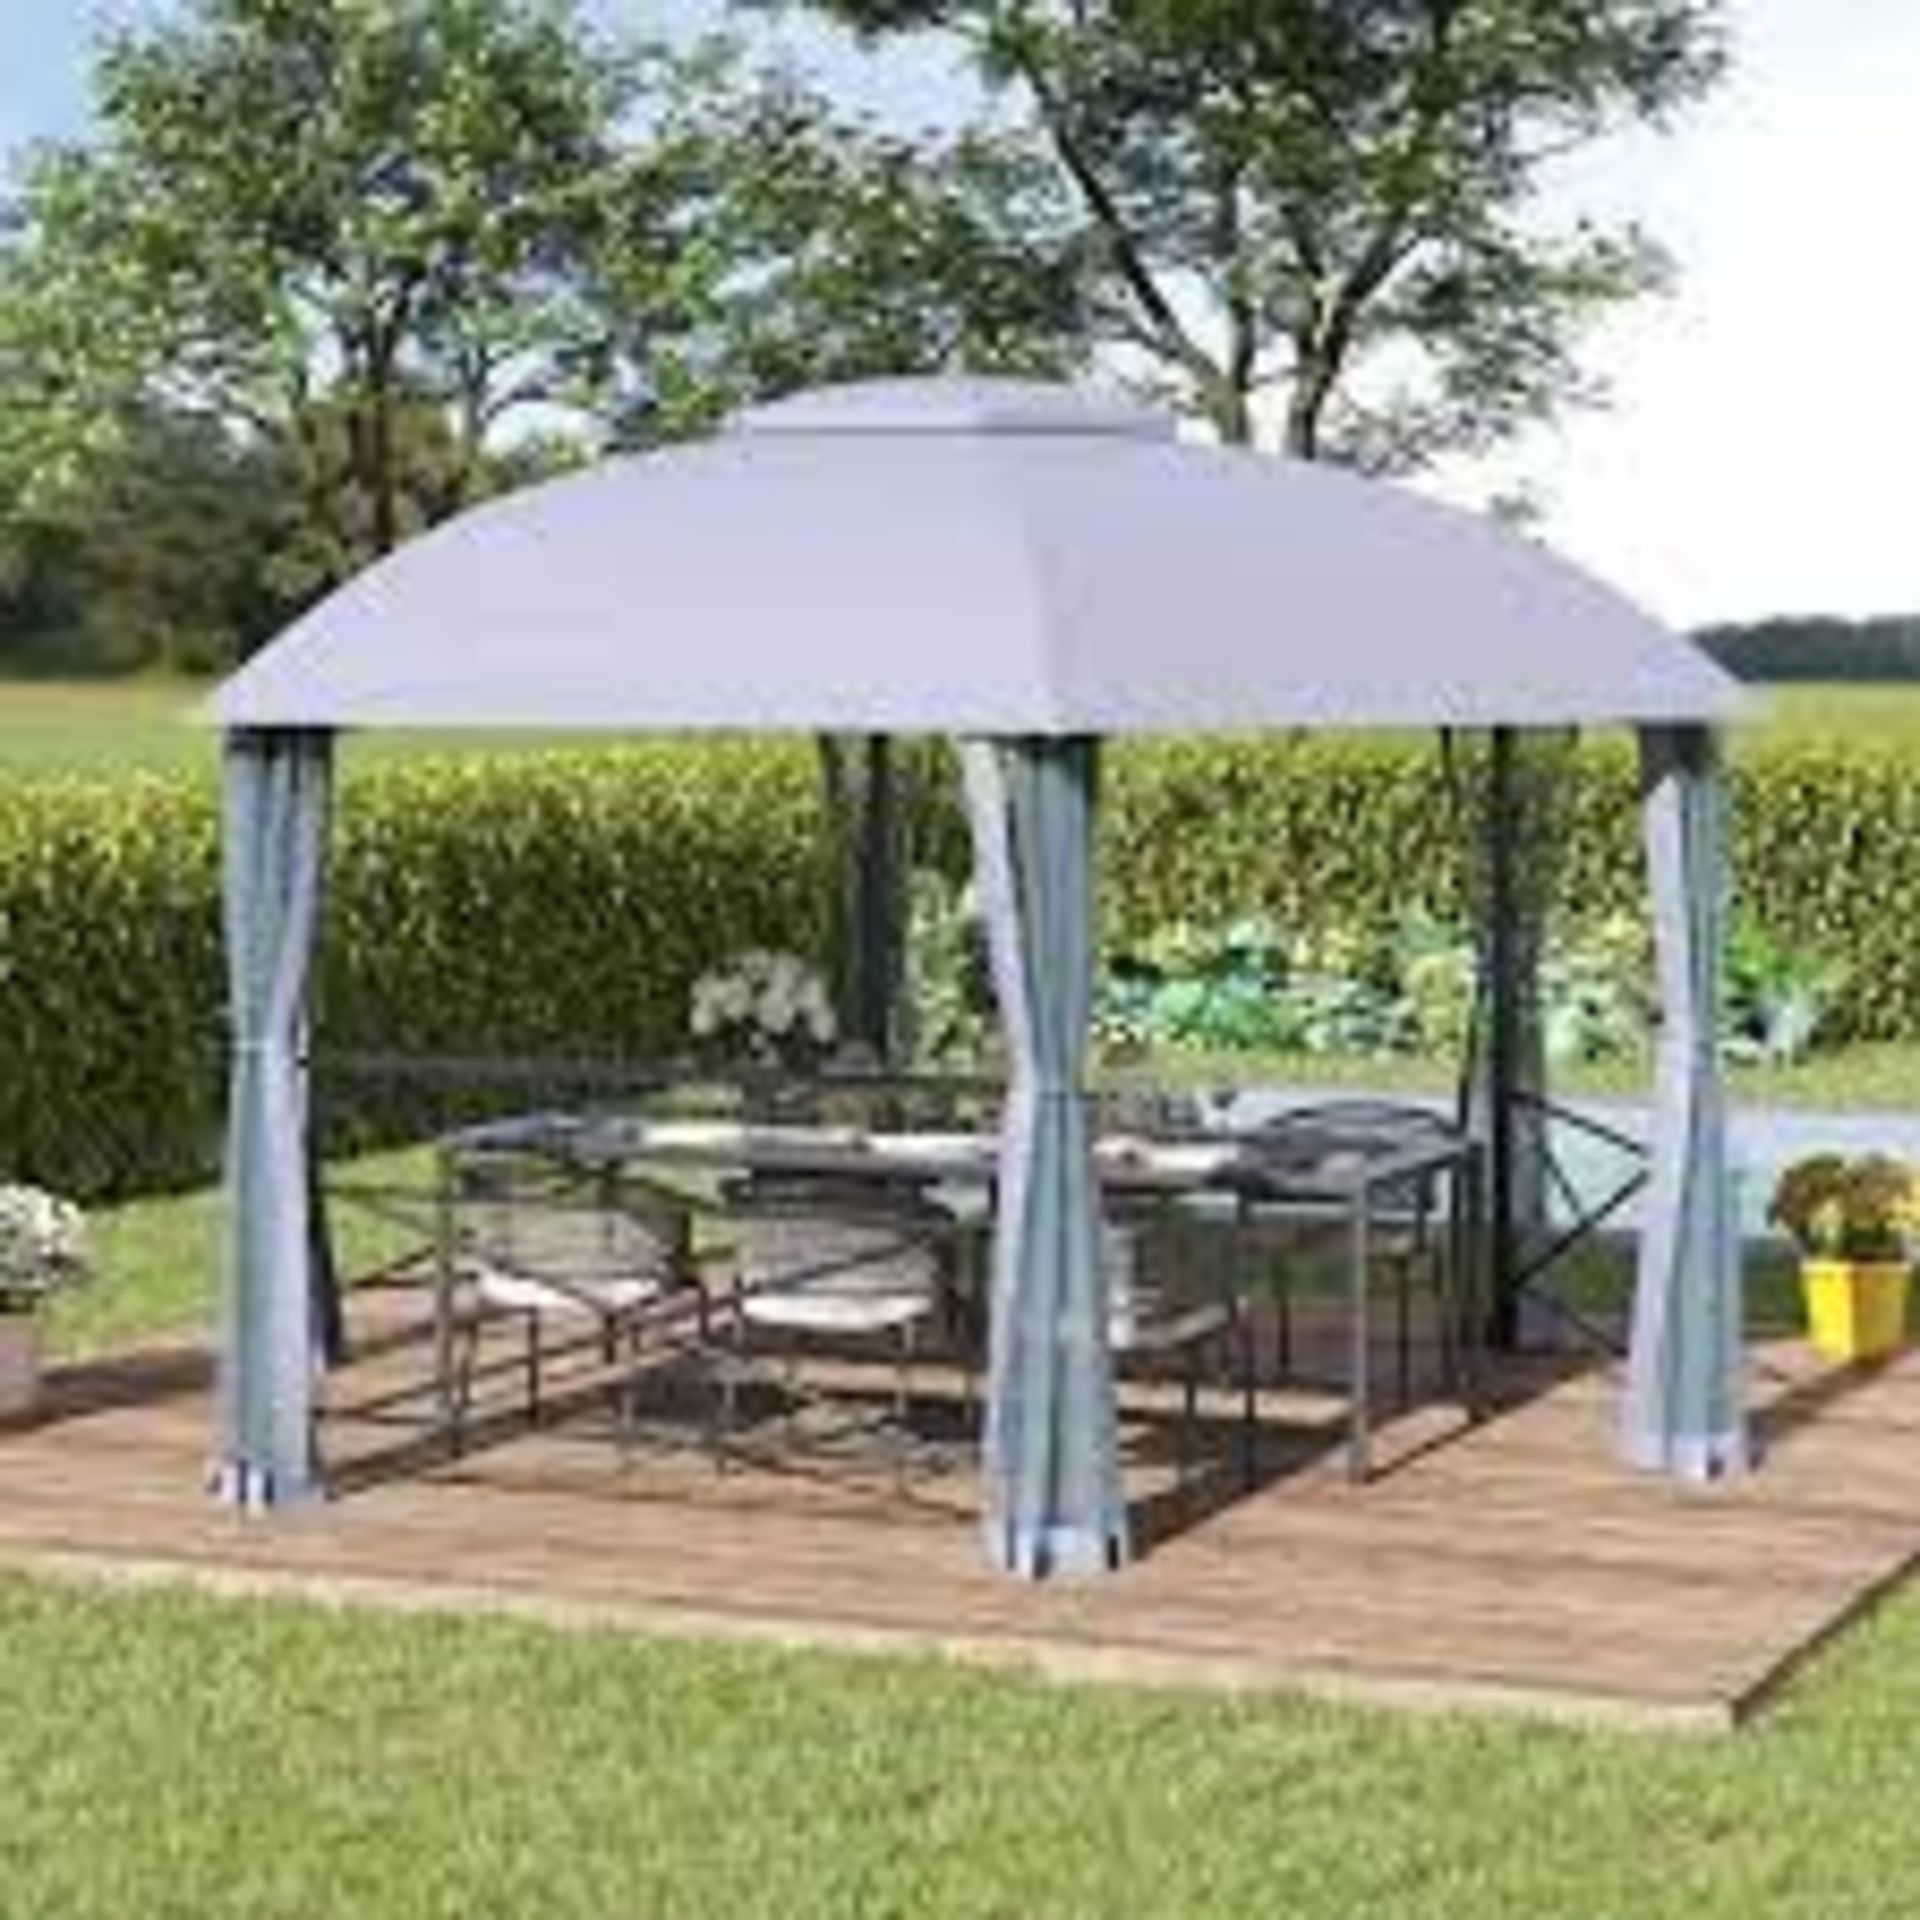 2 Tier Dome Shaped Gazebo with Mesh Curtains 4700x4700mm. - RRP £395.00. - SR27. This beautiful dome - Image 2 of 2